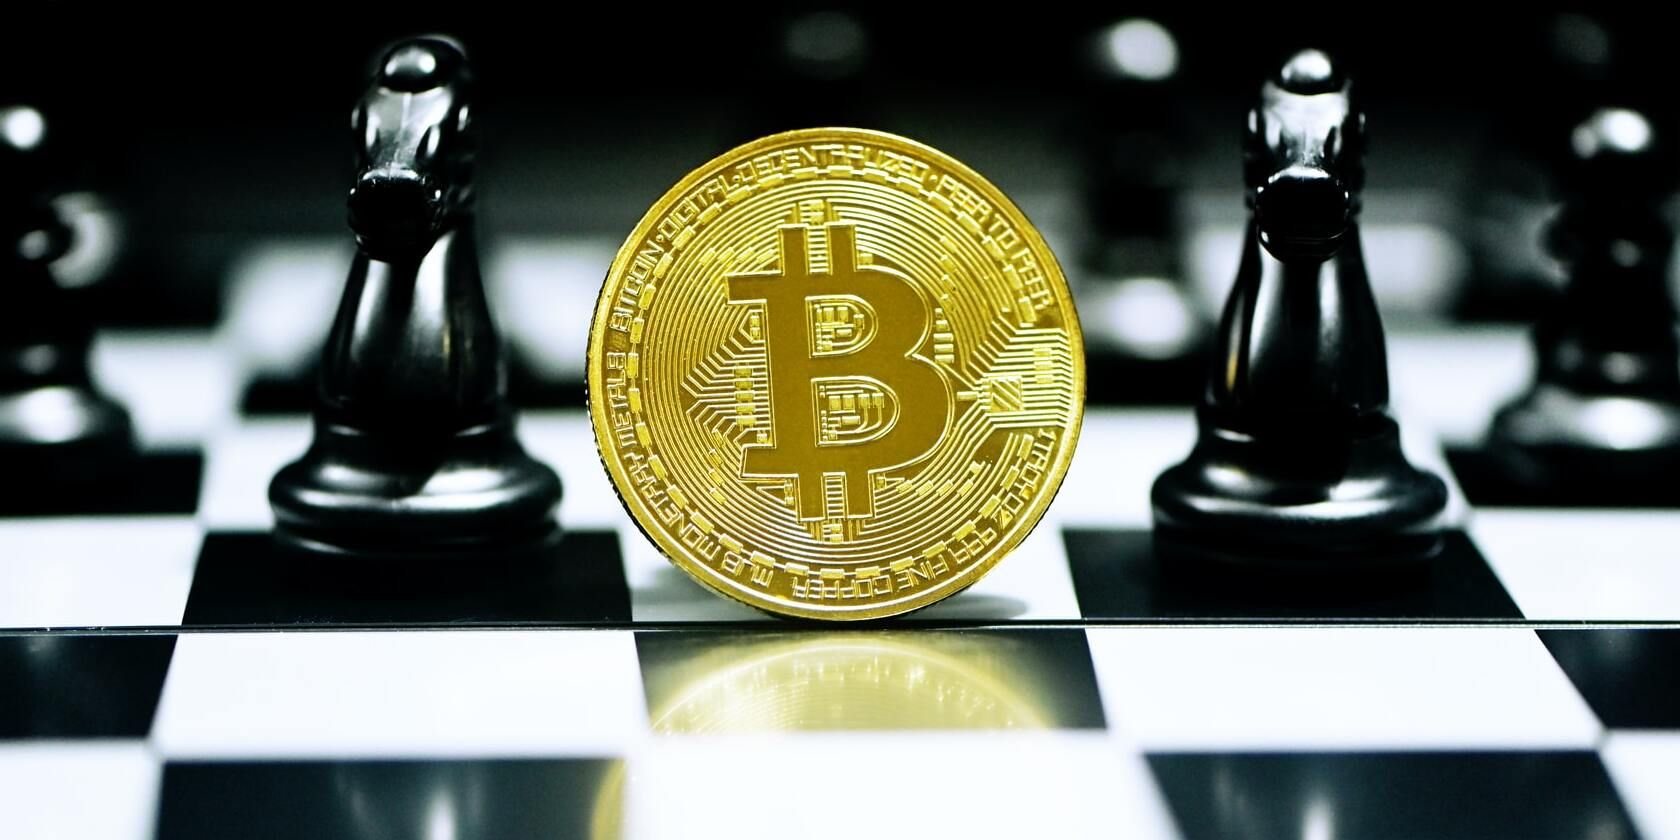 Image of a Bitcoin on a chessboard